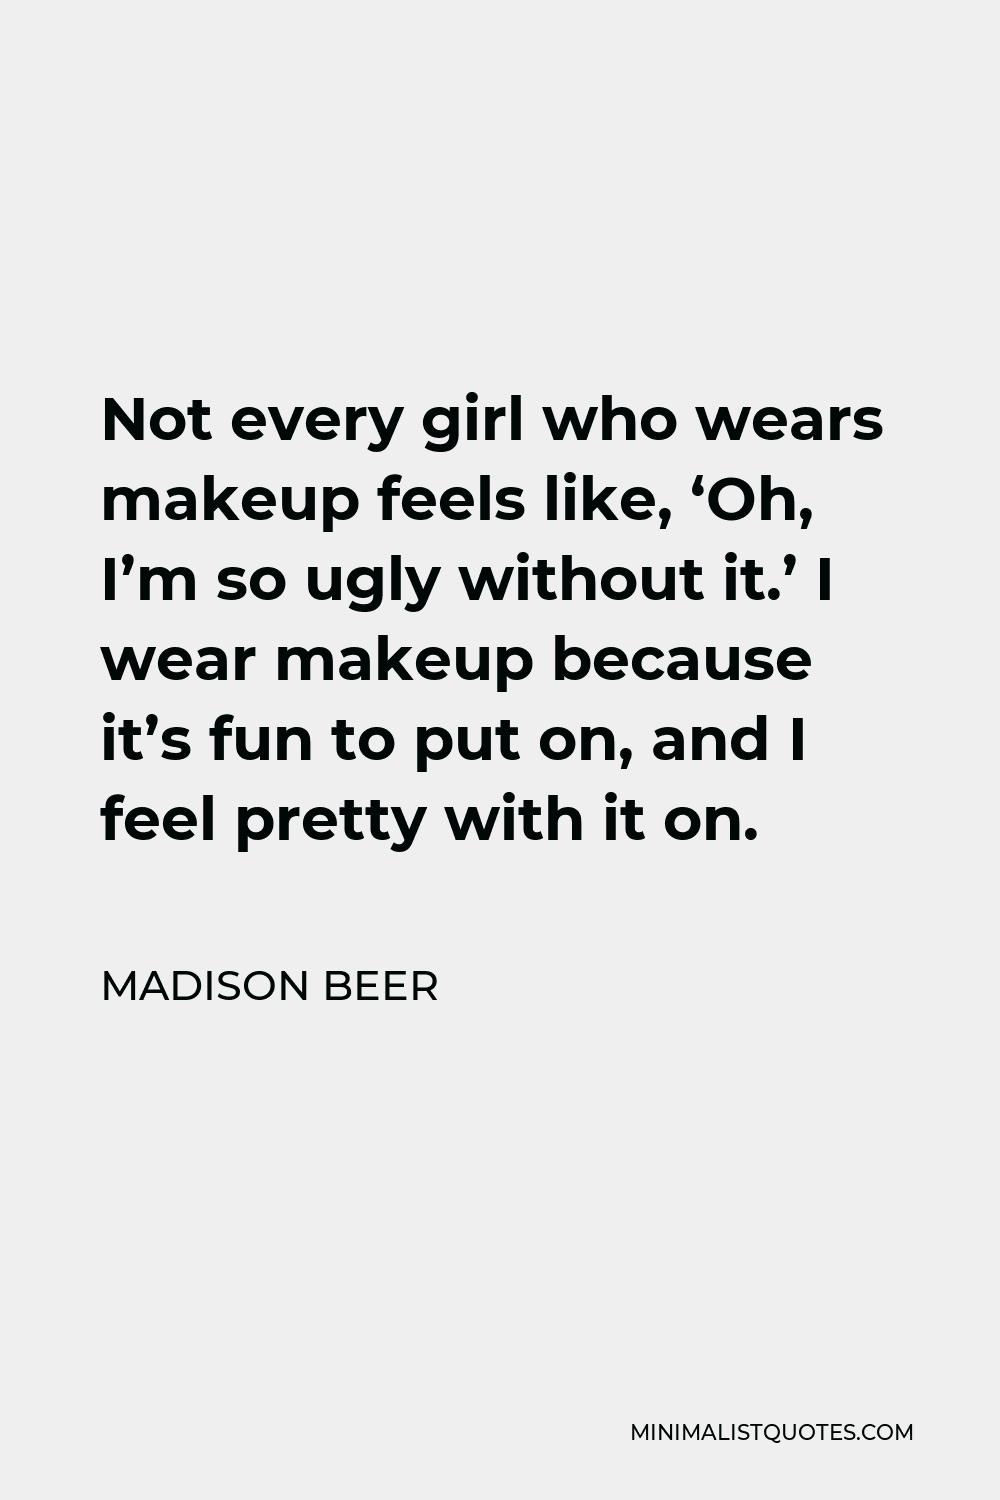 Madison Beer Quote - Not every girl who wears makeup feels like, ‘Oh, I’m so ugly without it.’ I wear makeup because it’s fun to put on, and I feel pretty with it on.